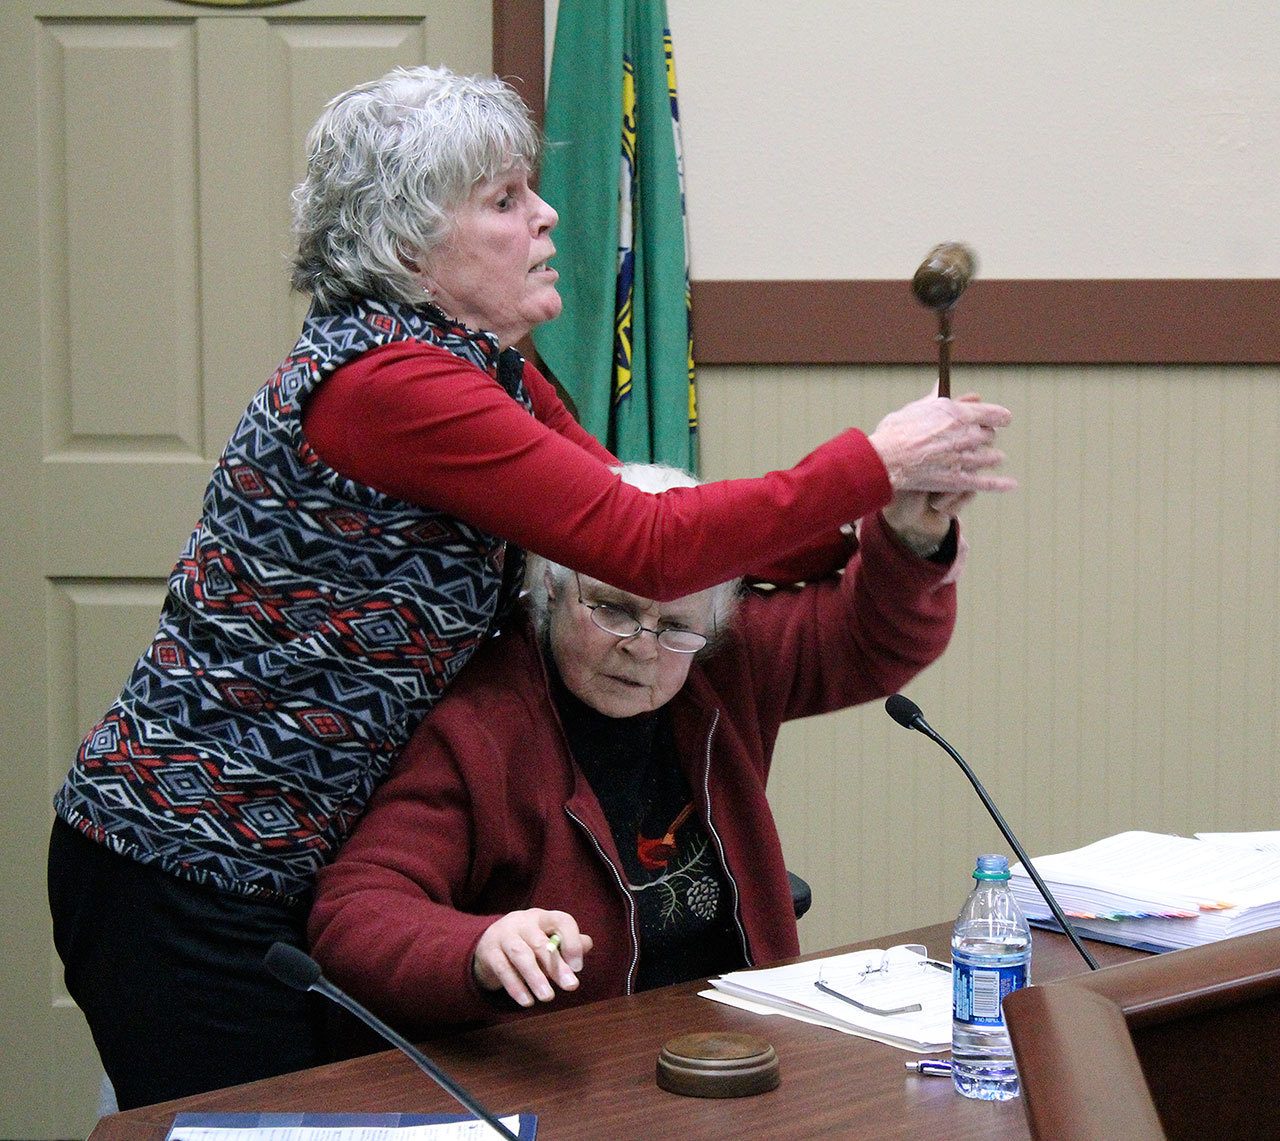 During a recess called by Mayor Benson, Mayor Pro Tempore Erika Morgan took Benson’s seat as chair and attempted to continue the council meeting. Benson wrested the gavel from Morgan as Black Diamond police officers stepped in. Photo by Ray Still.